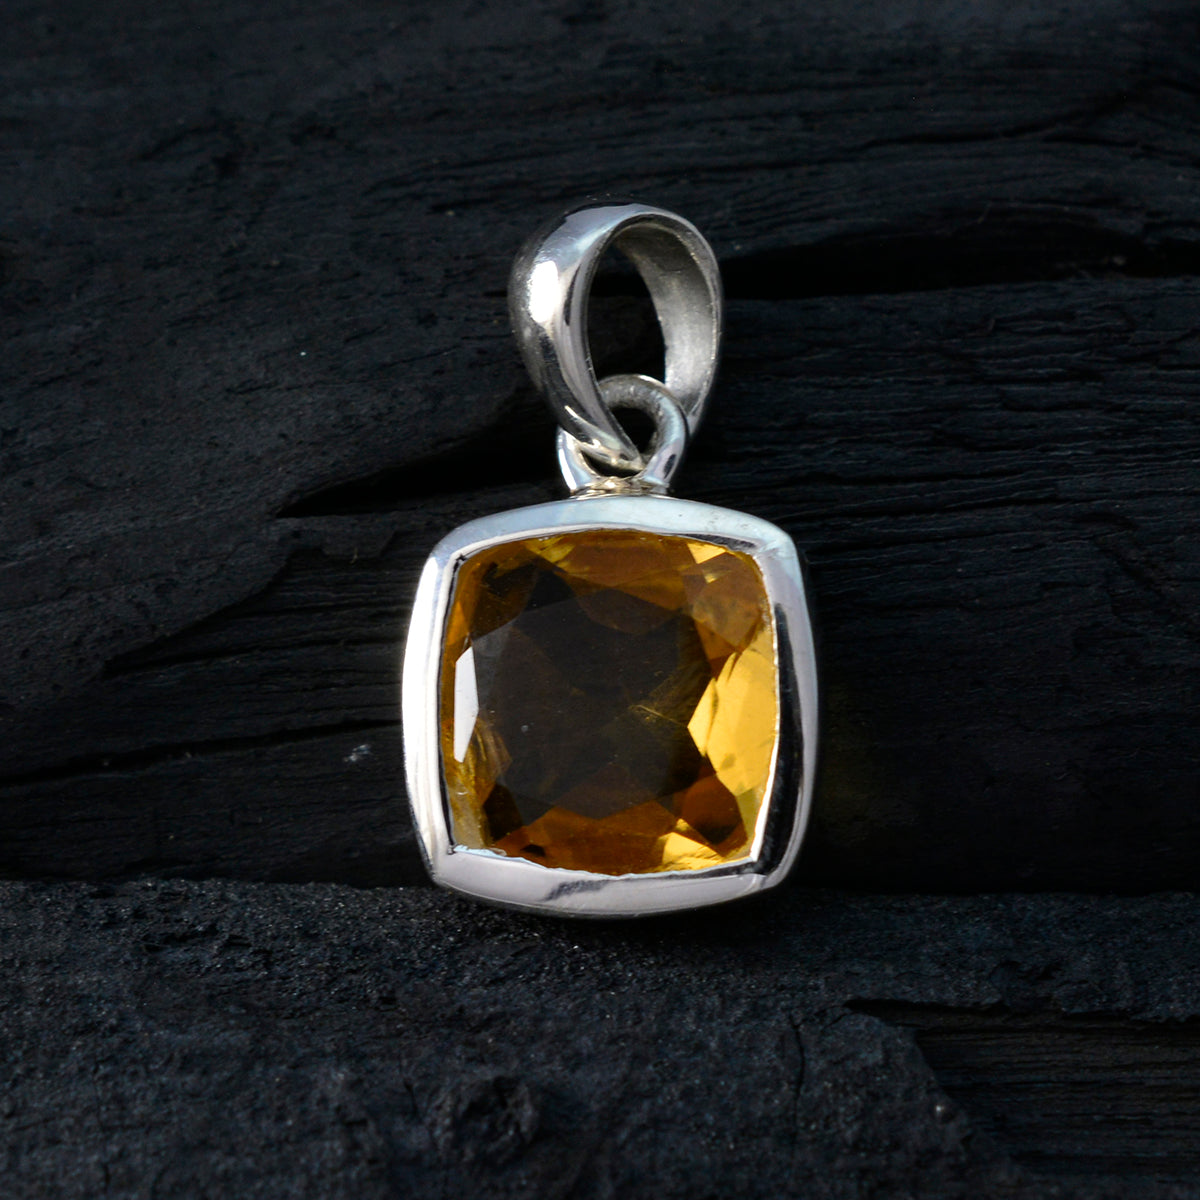 Riyo Exquisite Gemstone Cushion Faceted Yellow Citrine Sterling Silver Pendant Gift For Women